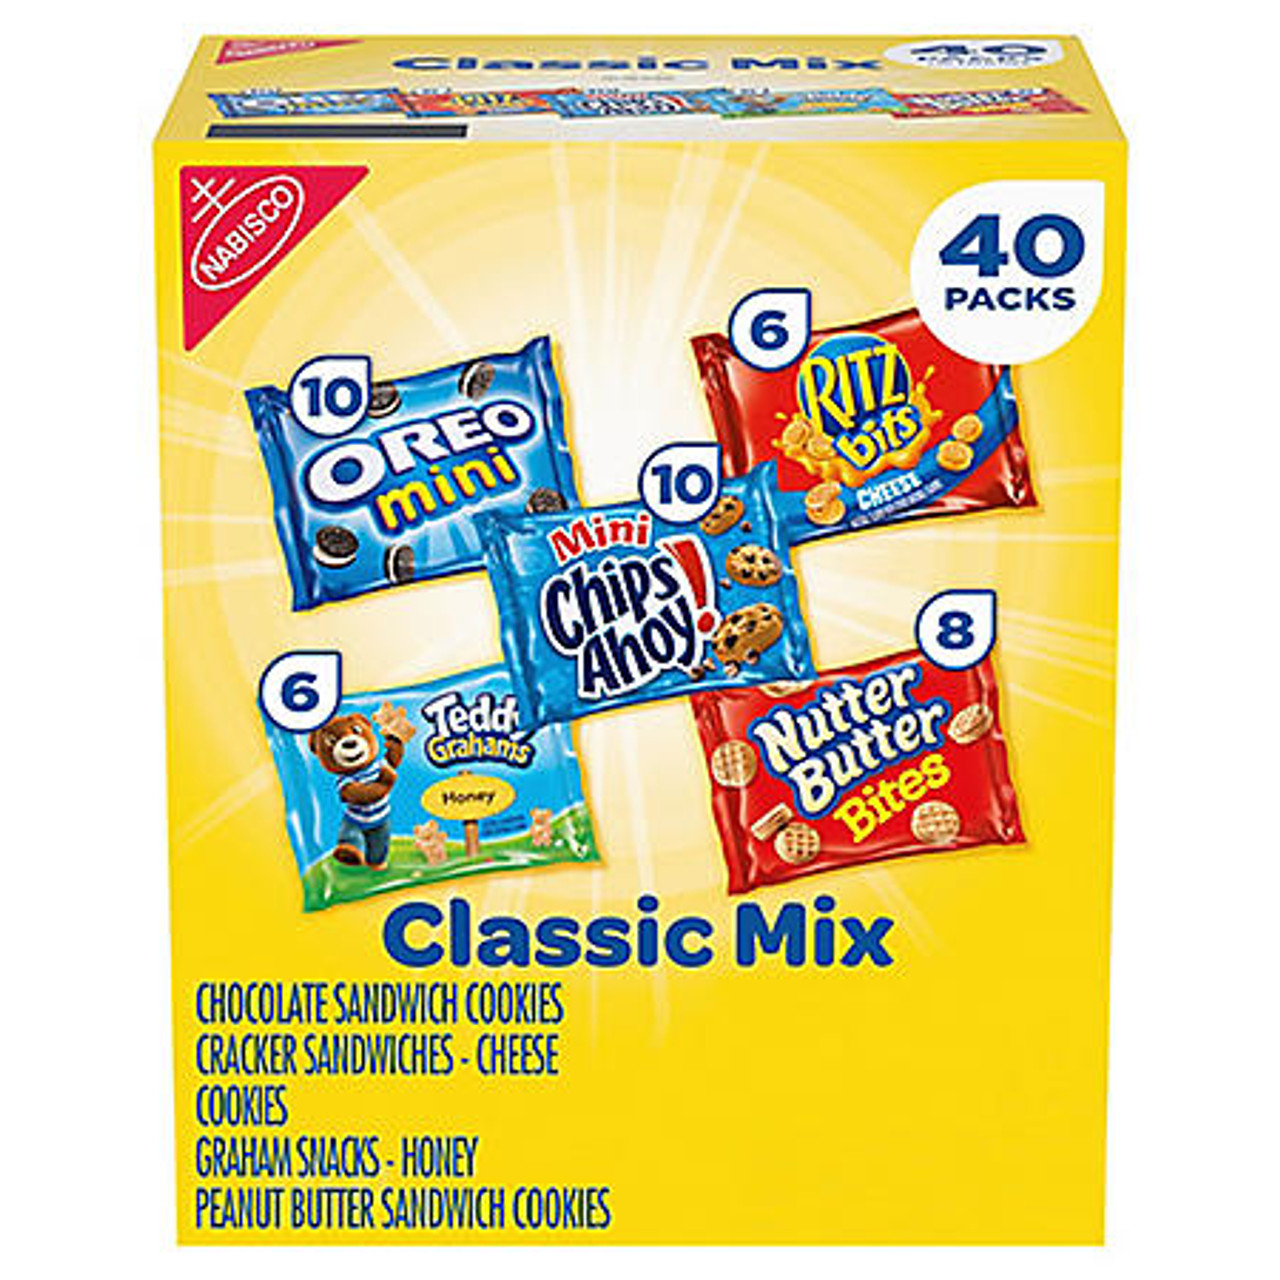 Nabisco Classic Mix Variety Pack (40 pk.) - [From 66.00 - Choose pk Qty ] - *Ships from Miami